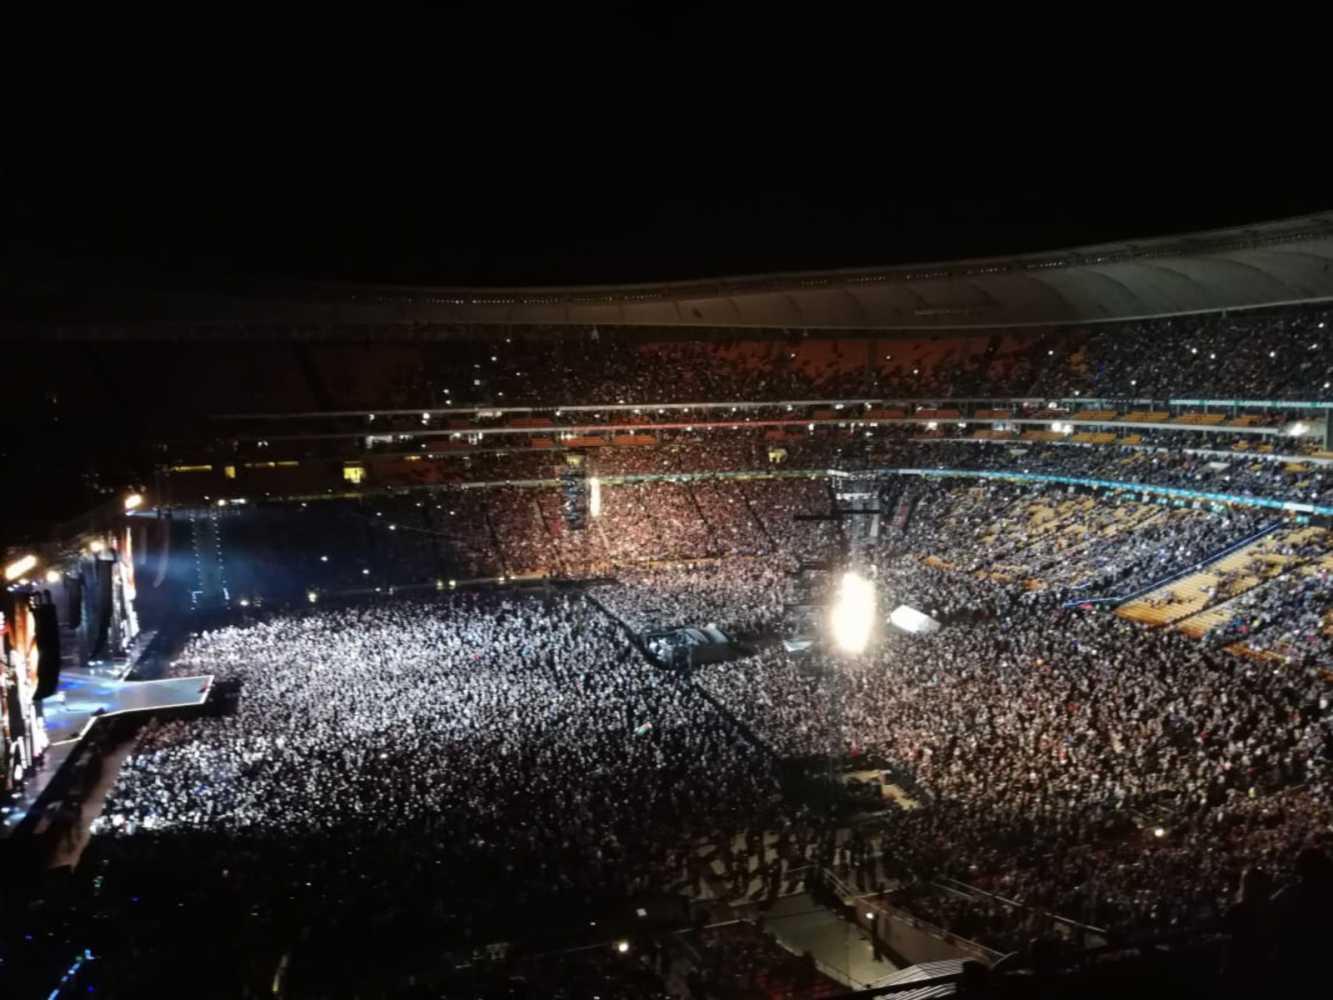 The massive Global Citizen Festival was staged in the FNB Stadium in Johannesburg